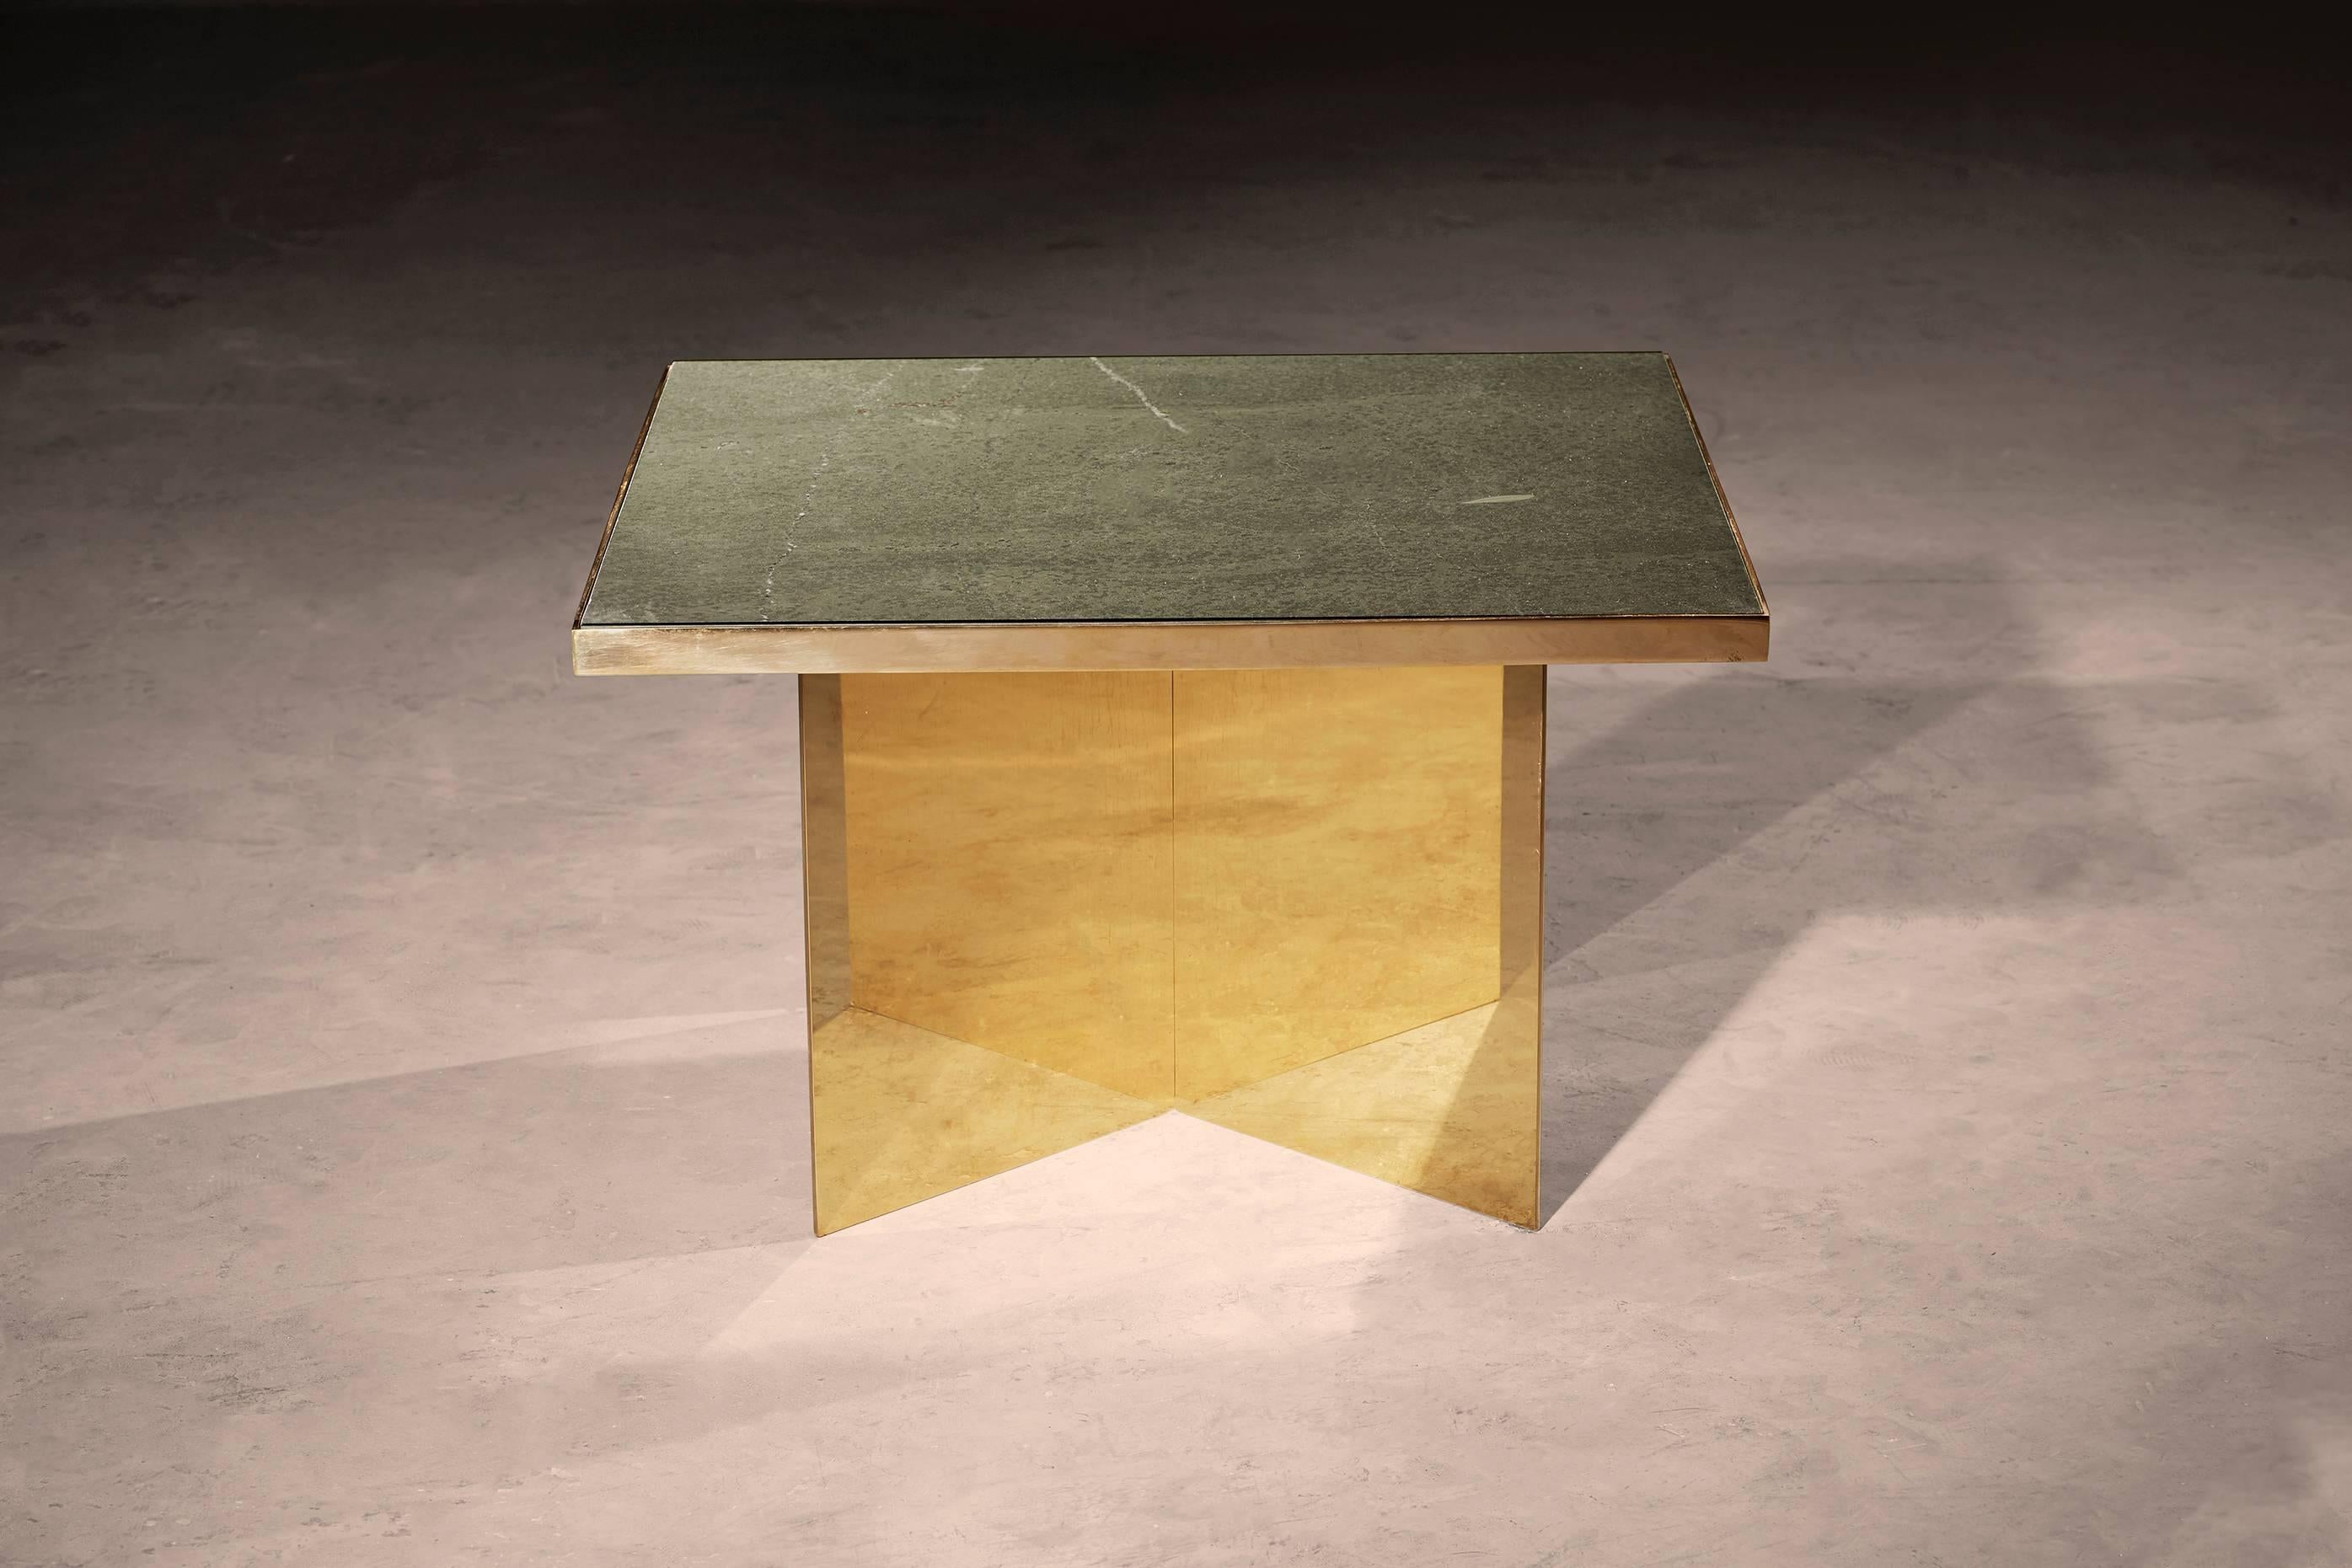 A coffee or side table in honed Cumbria slate and patinated brass. Hand crafted to order in the North. Bespoke finishes and sizes are available.

Measures: 100cm dia x 32cm height.
Custom finishes and sizes available upon request.

Made to order in